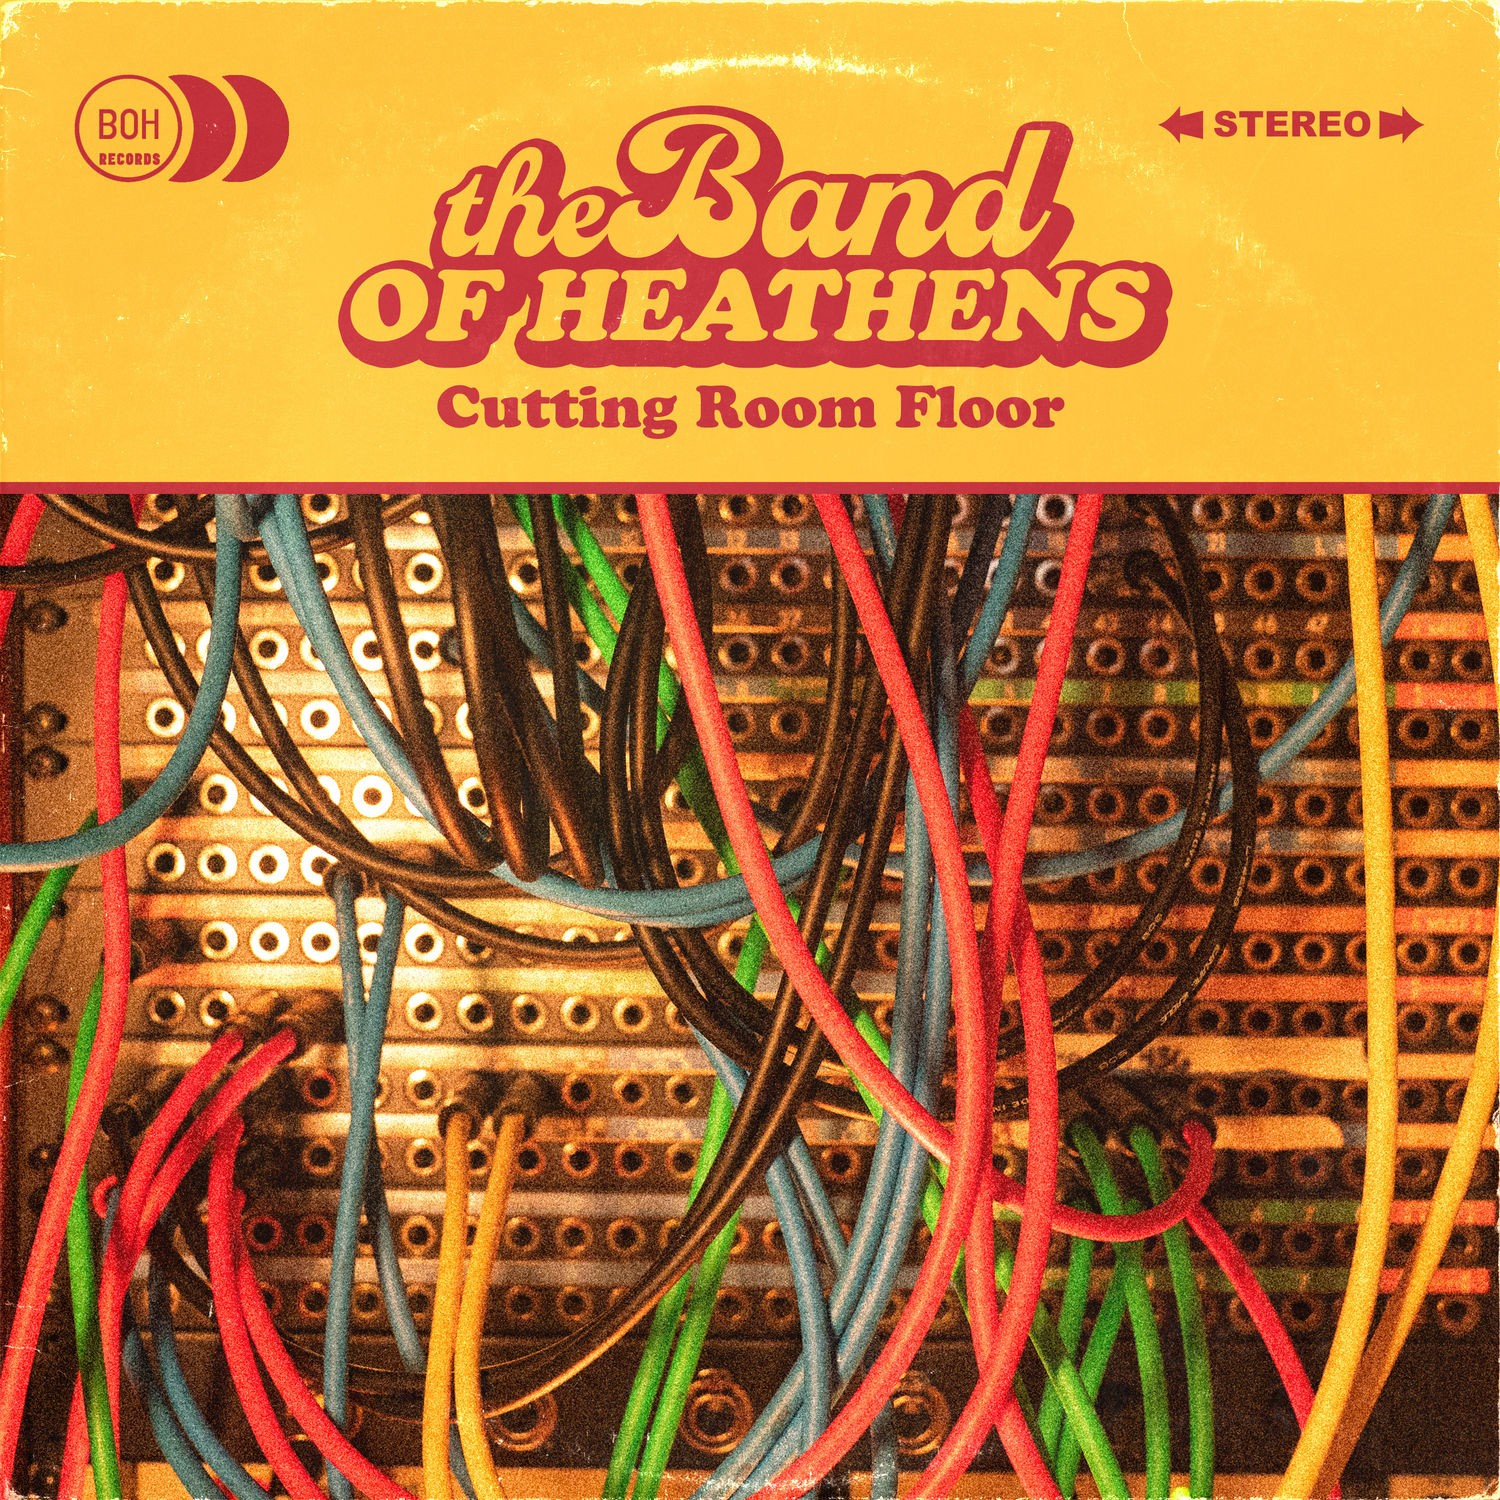 The Band Of Heathens - Cutting Room Floor